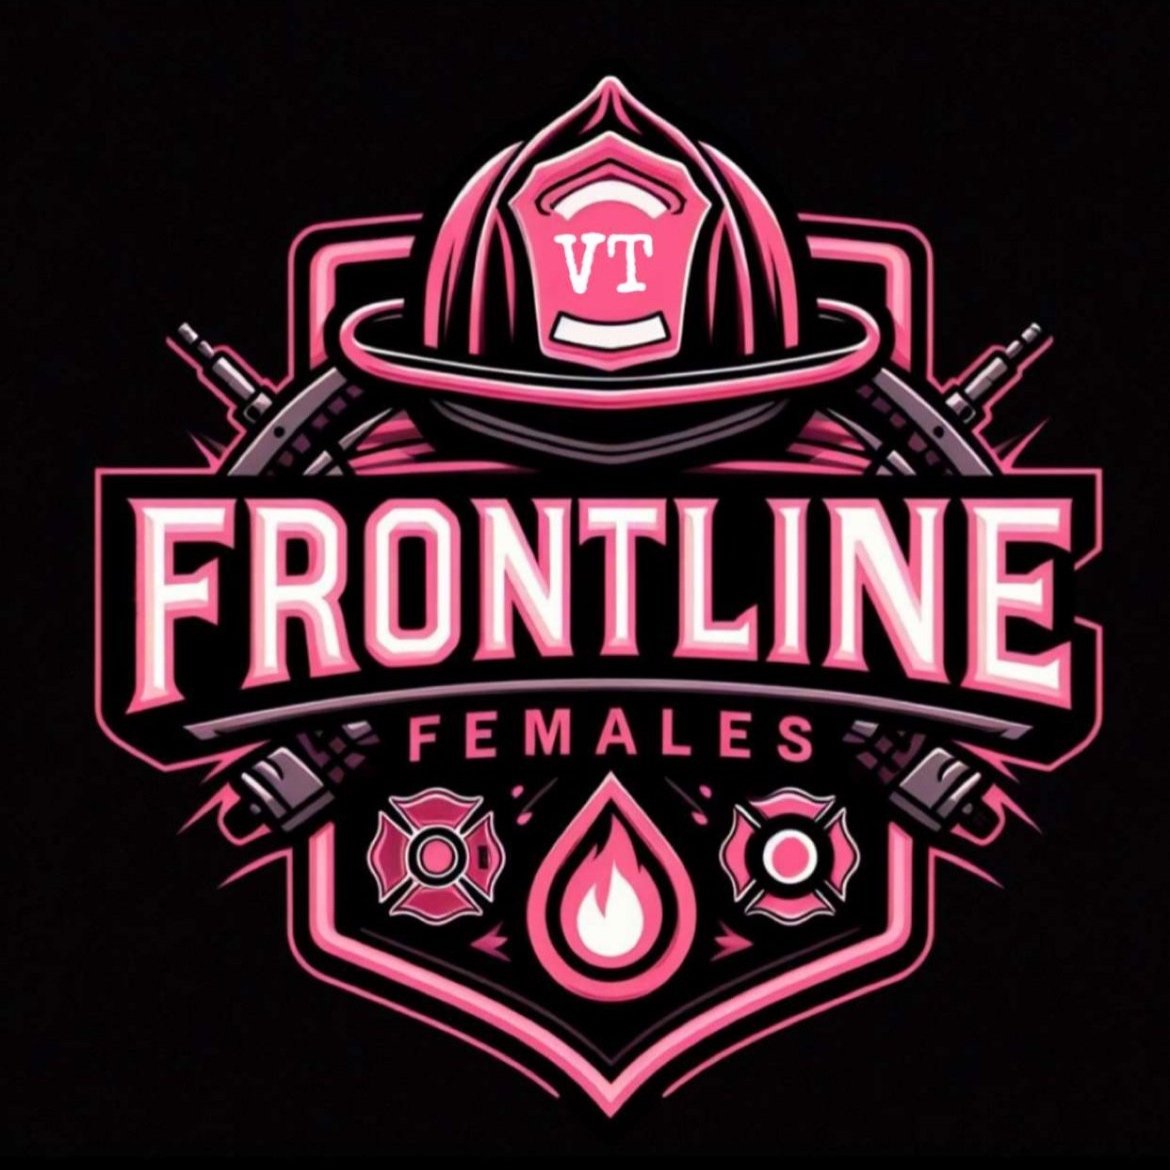 Frontline Females Fire Camp